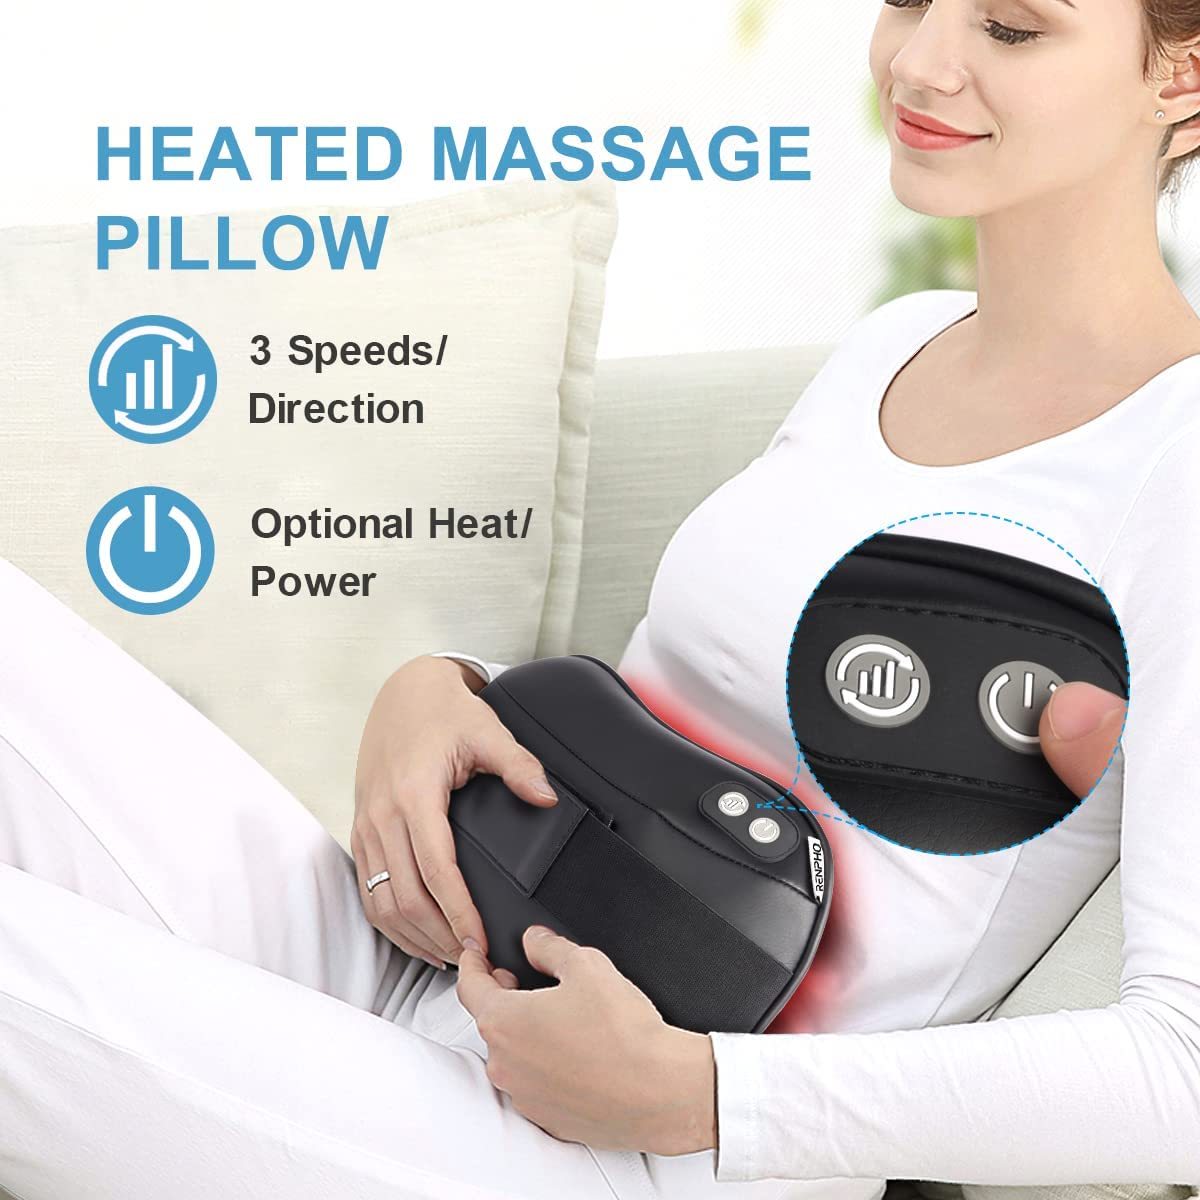 RENPHO Shiatsu Neck and Shoulder Back Massager with Heat, Deep Tissue 3D Kneading Massage Pillow for Pain Relief on Waist, Leg, Calf, Foot, Arm, Belly